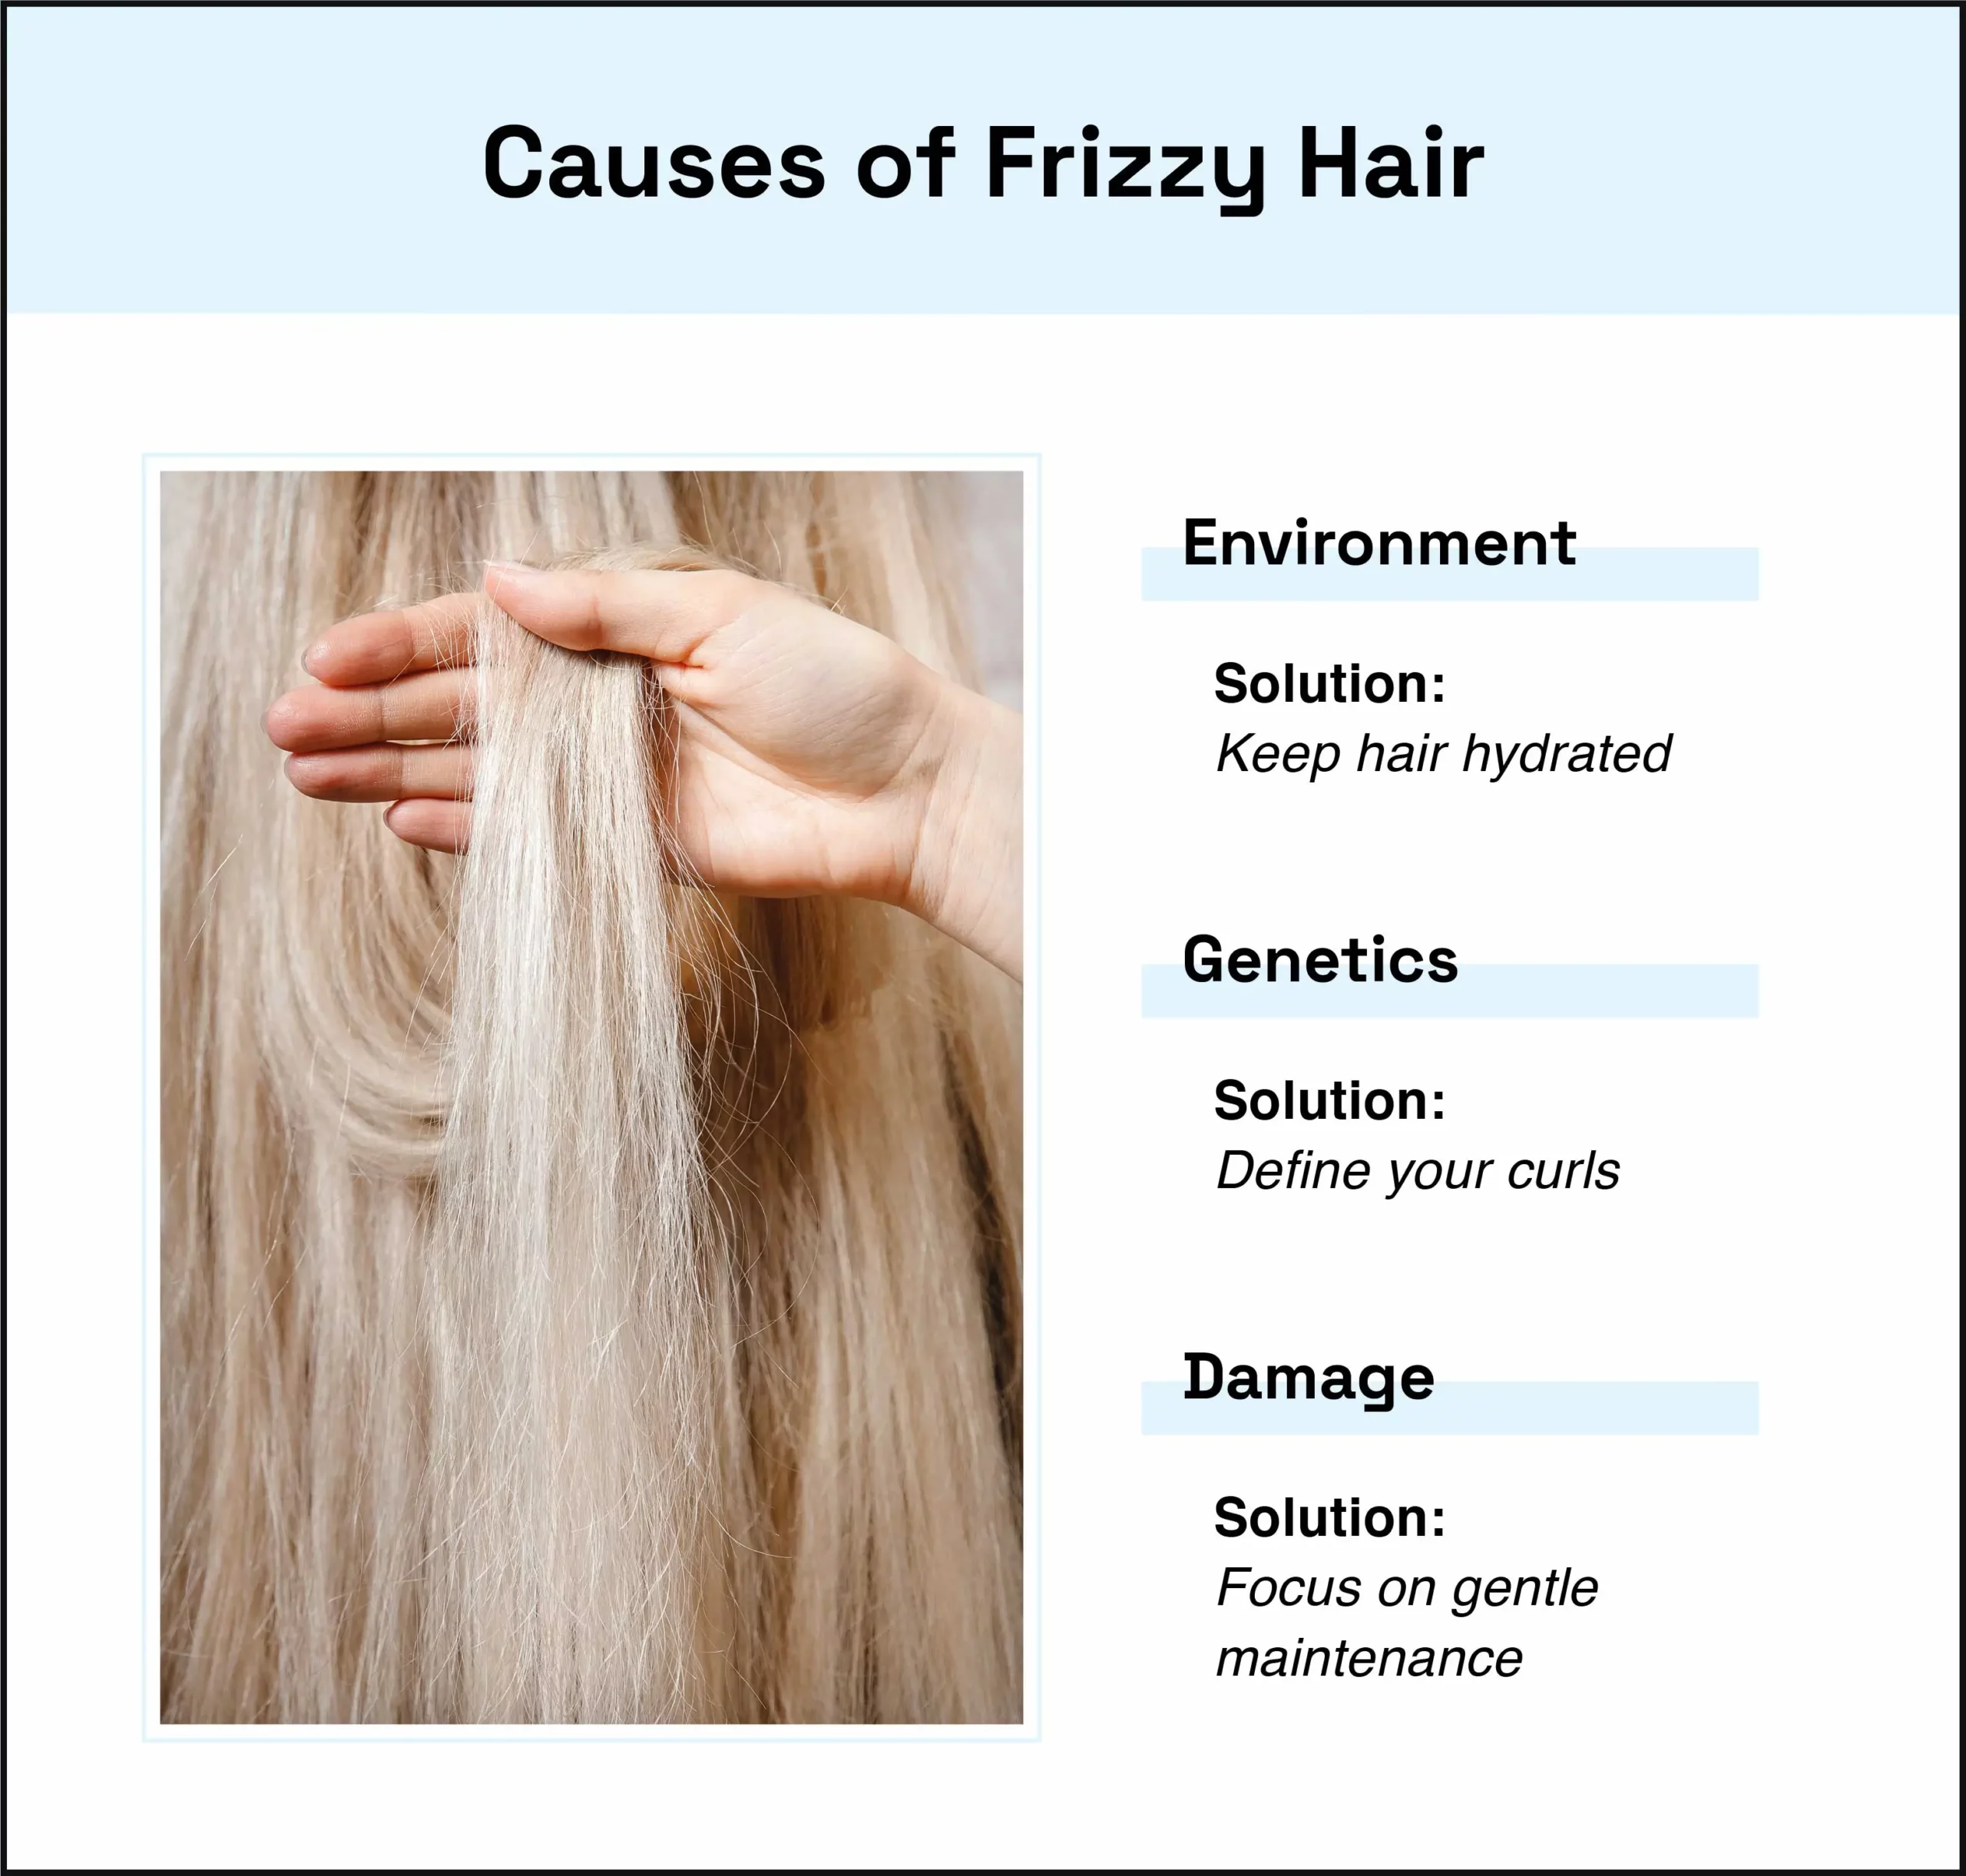 Image explains some common causes of frizzy hair.